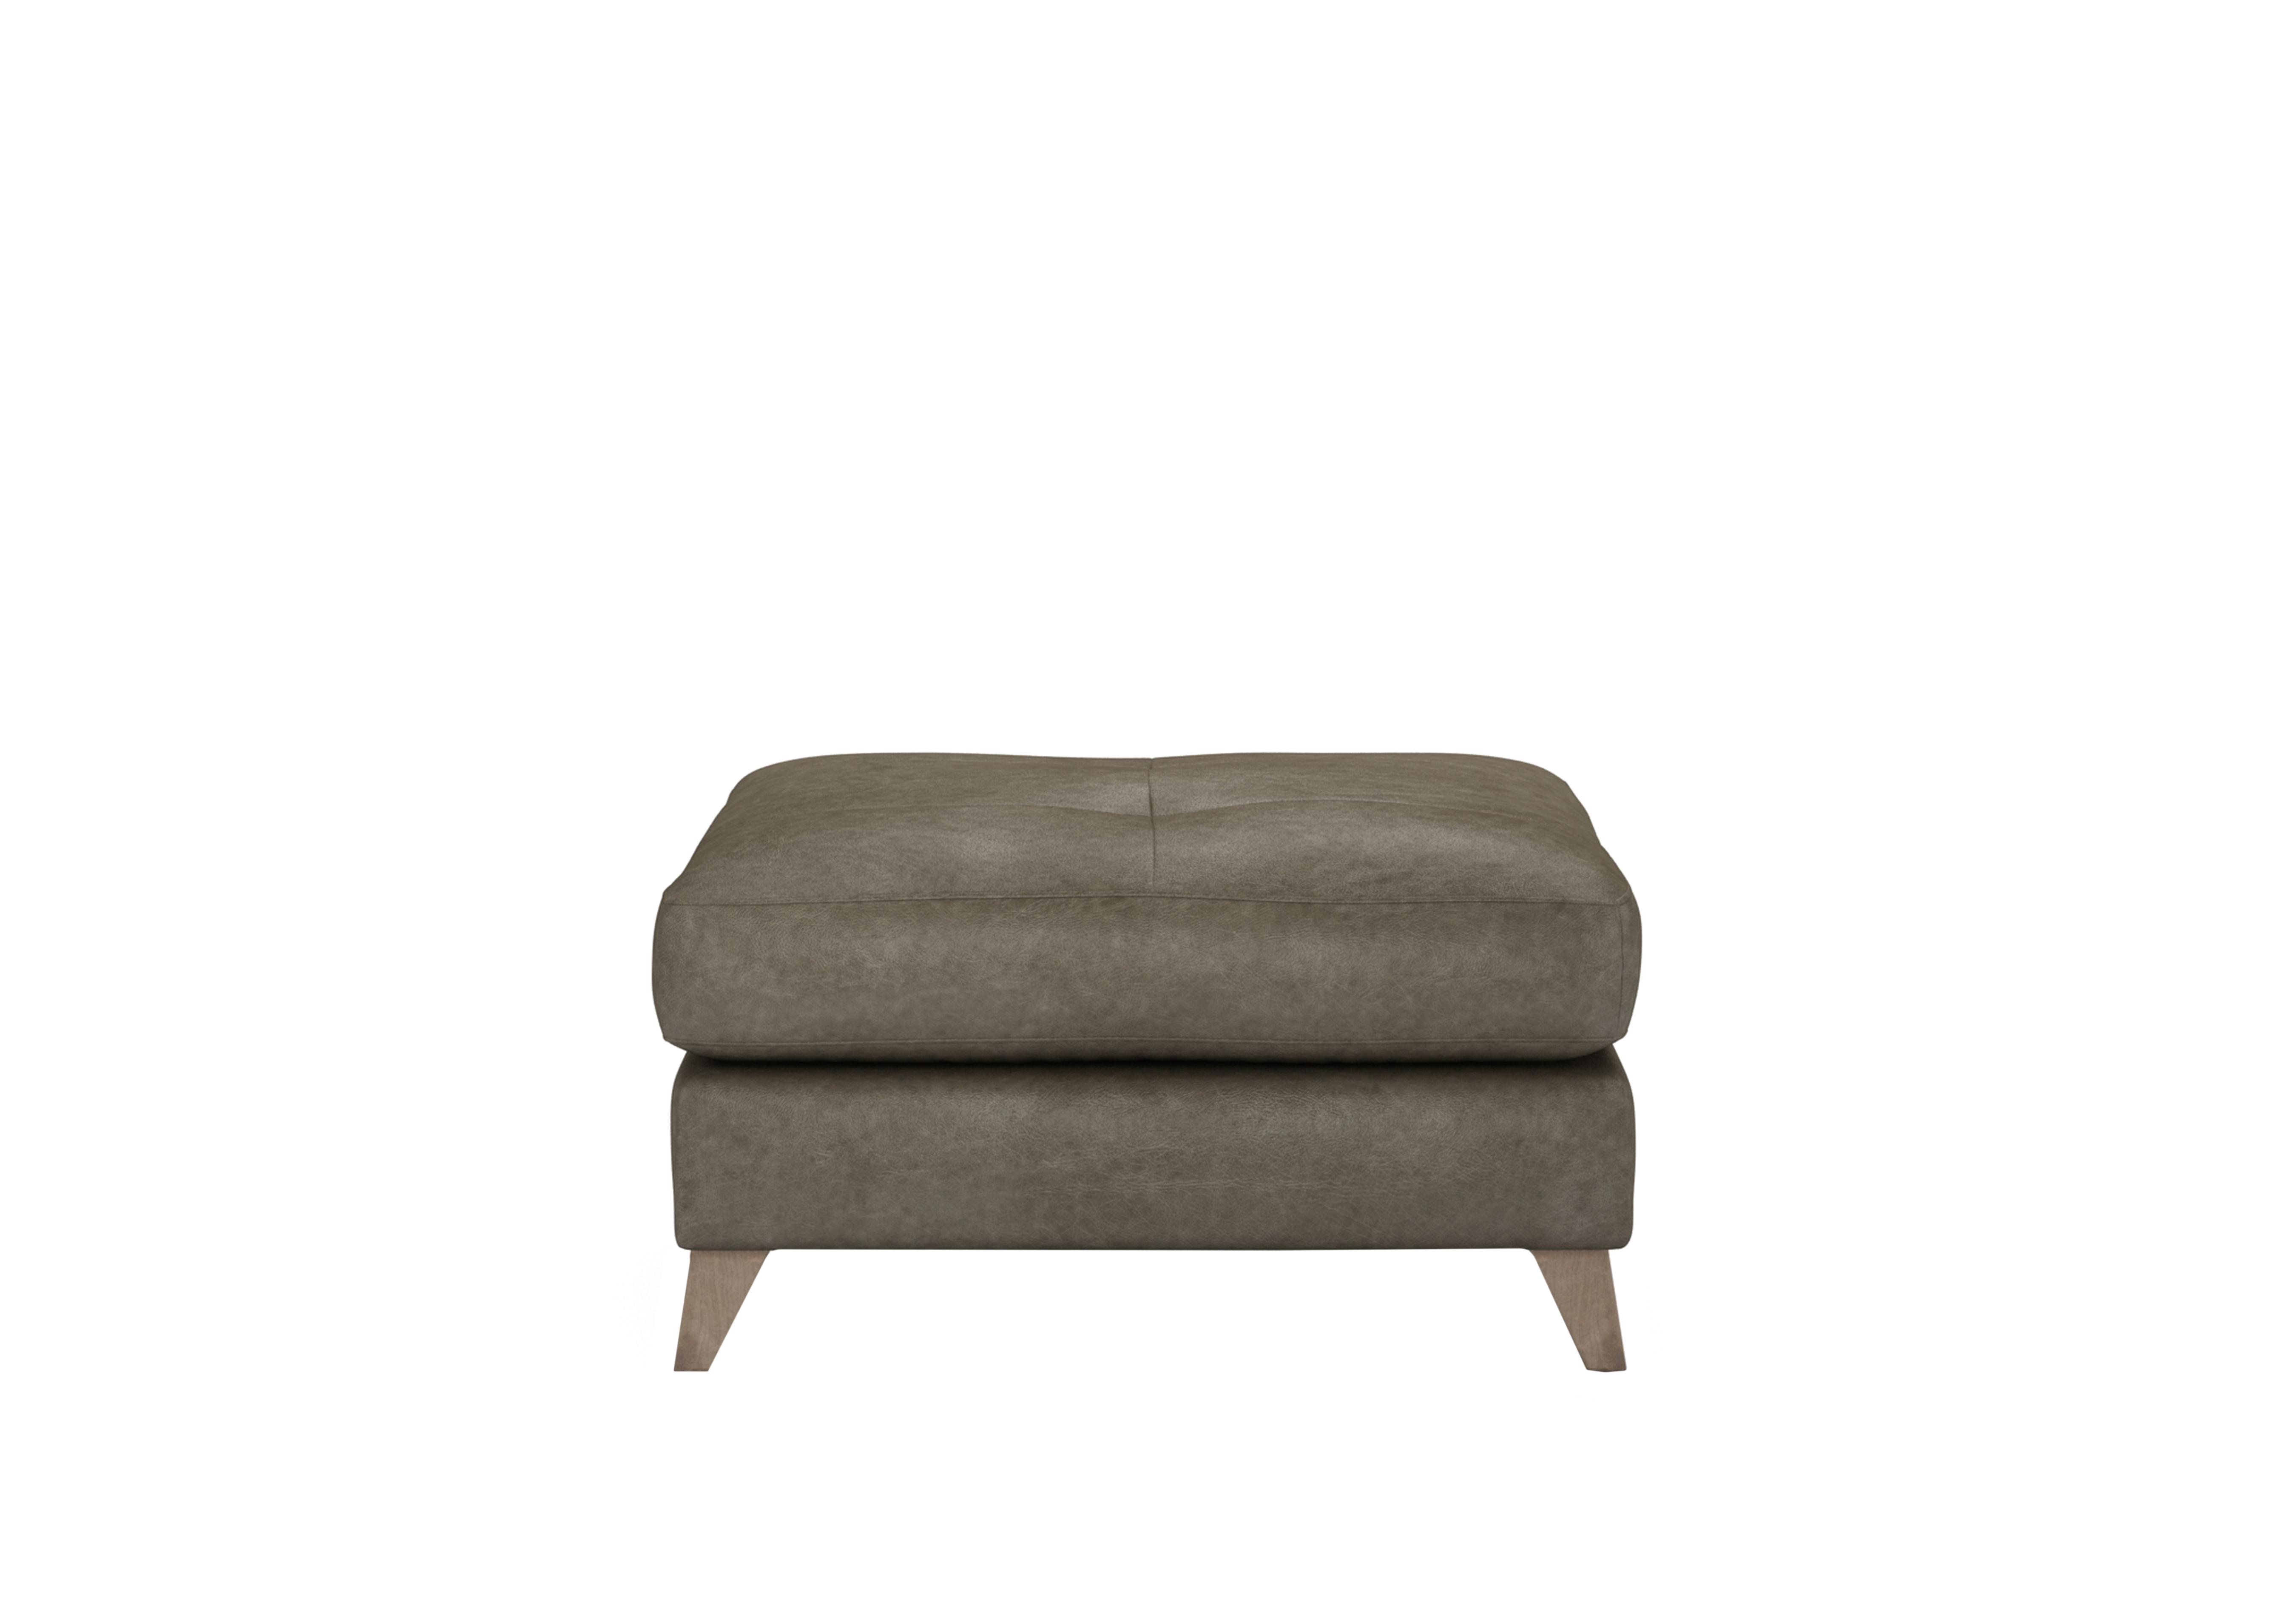 Hermione Leather Footstool in Gra189 Granite Wo Ft on Furniture Village